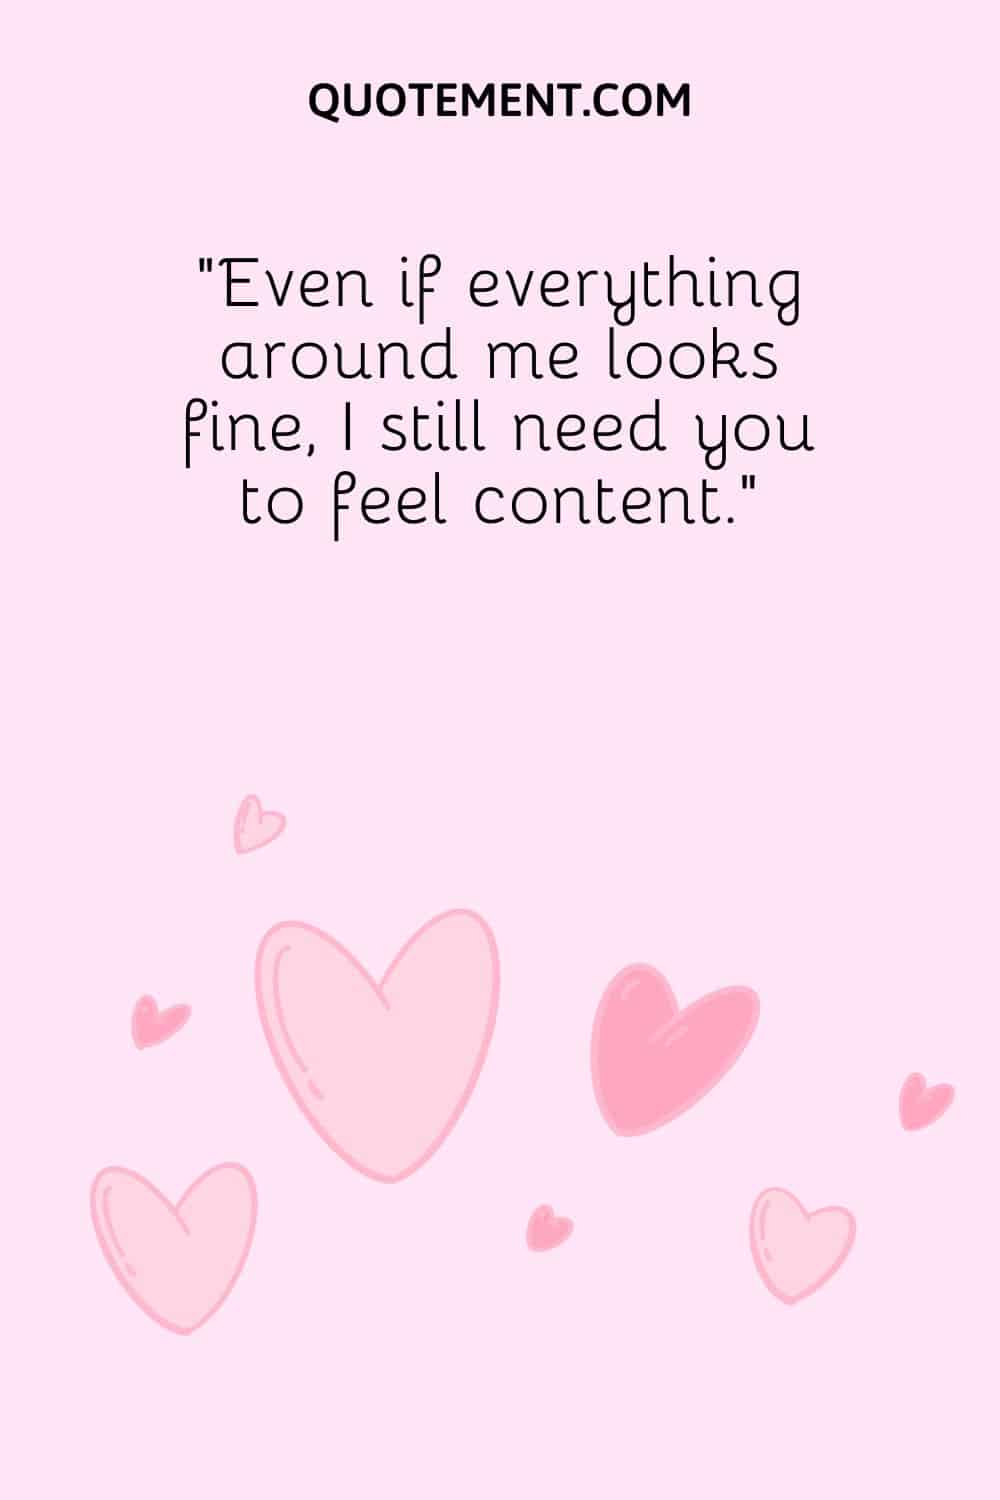 “Even if everything around me looks fine, I still need you to feel content.”